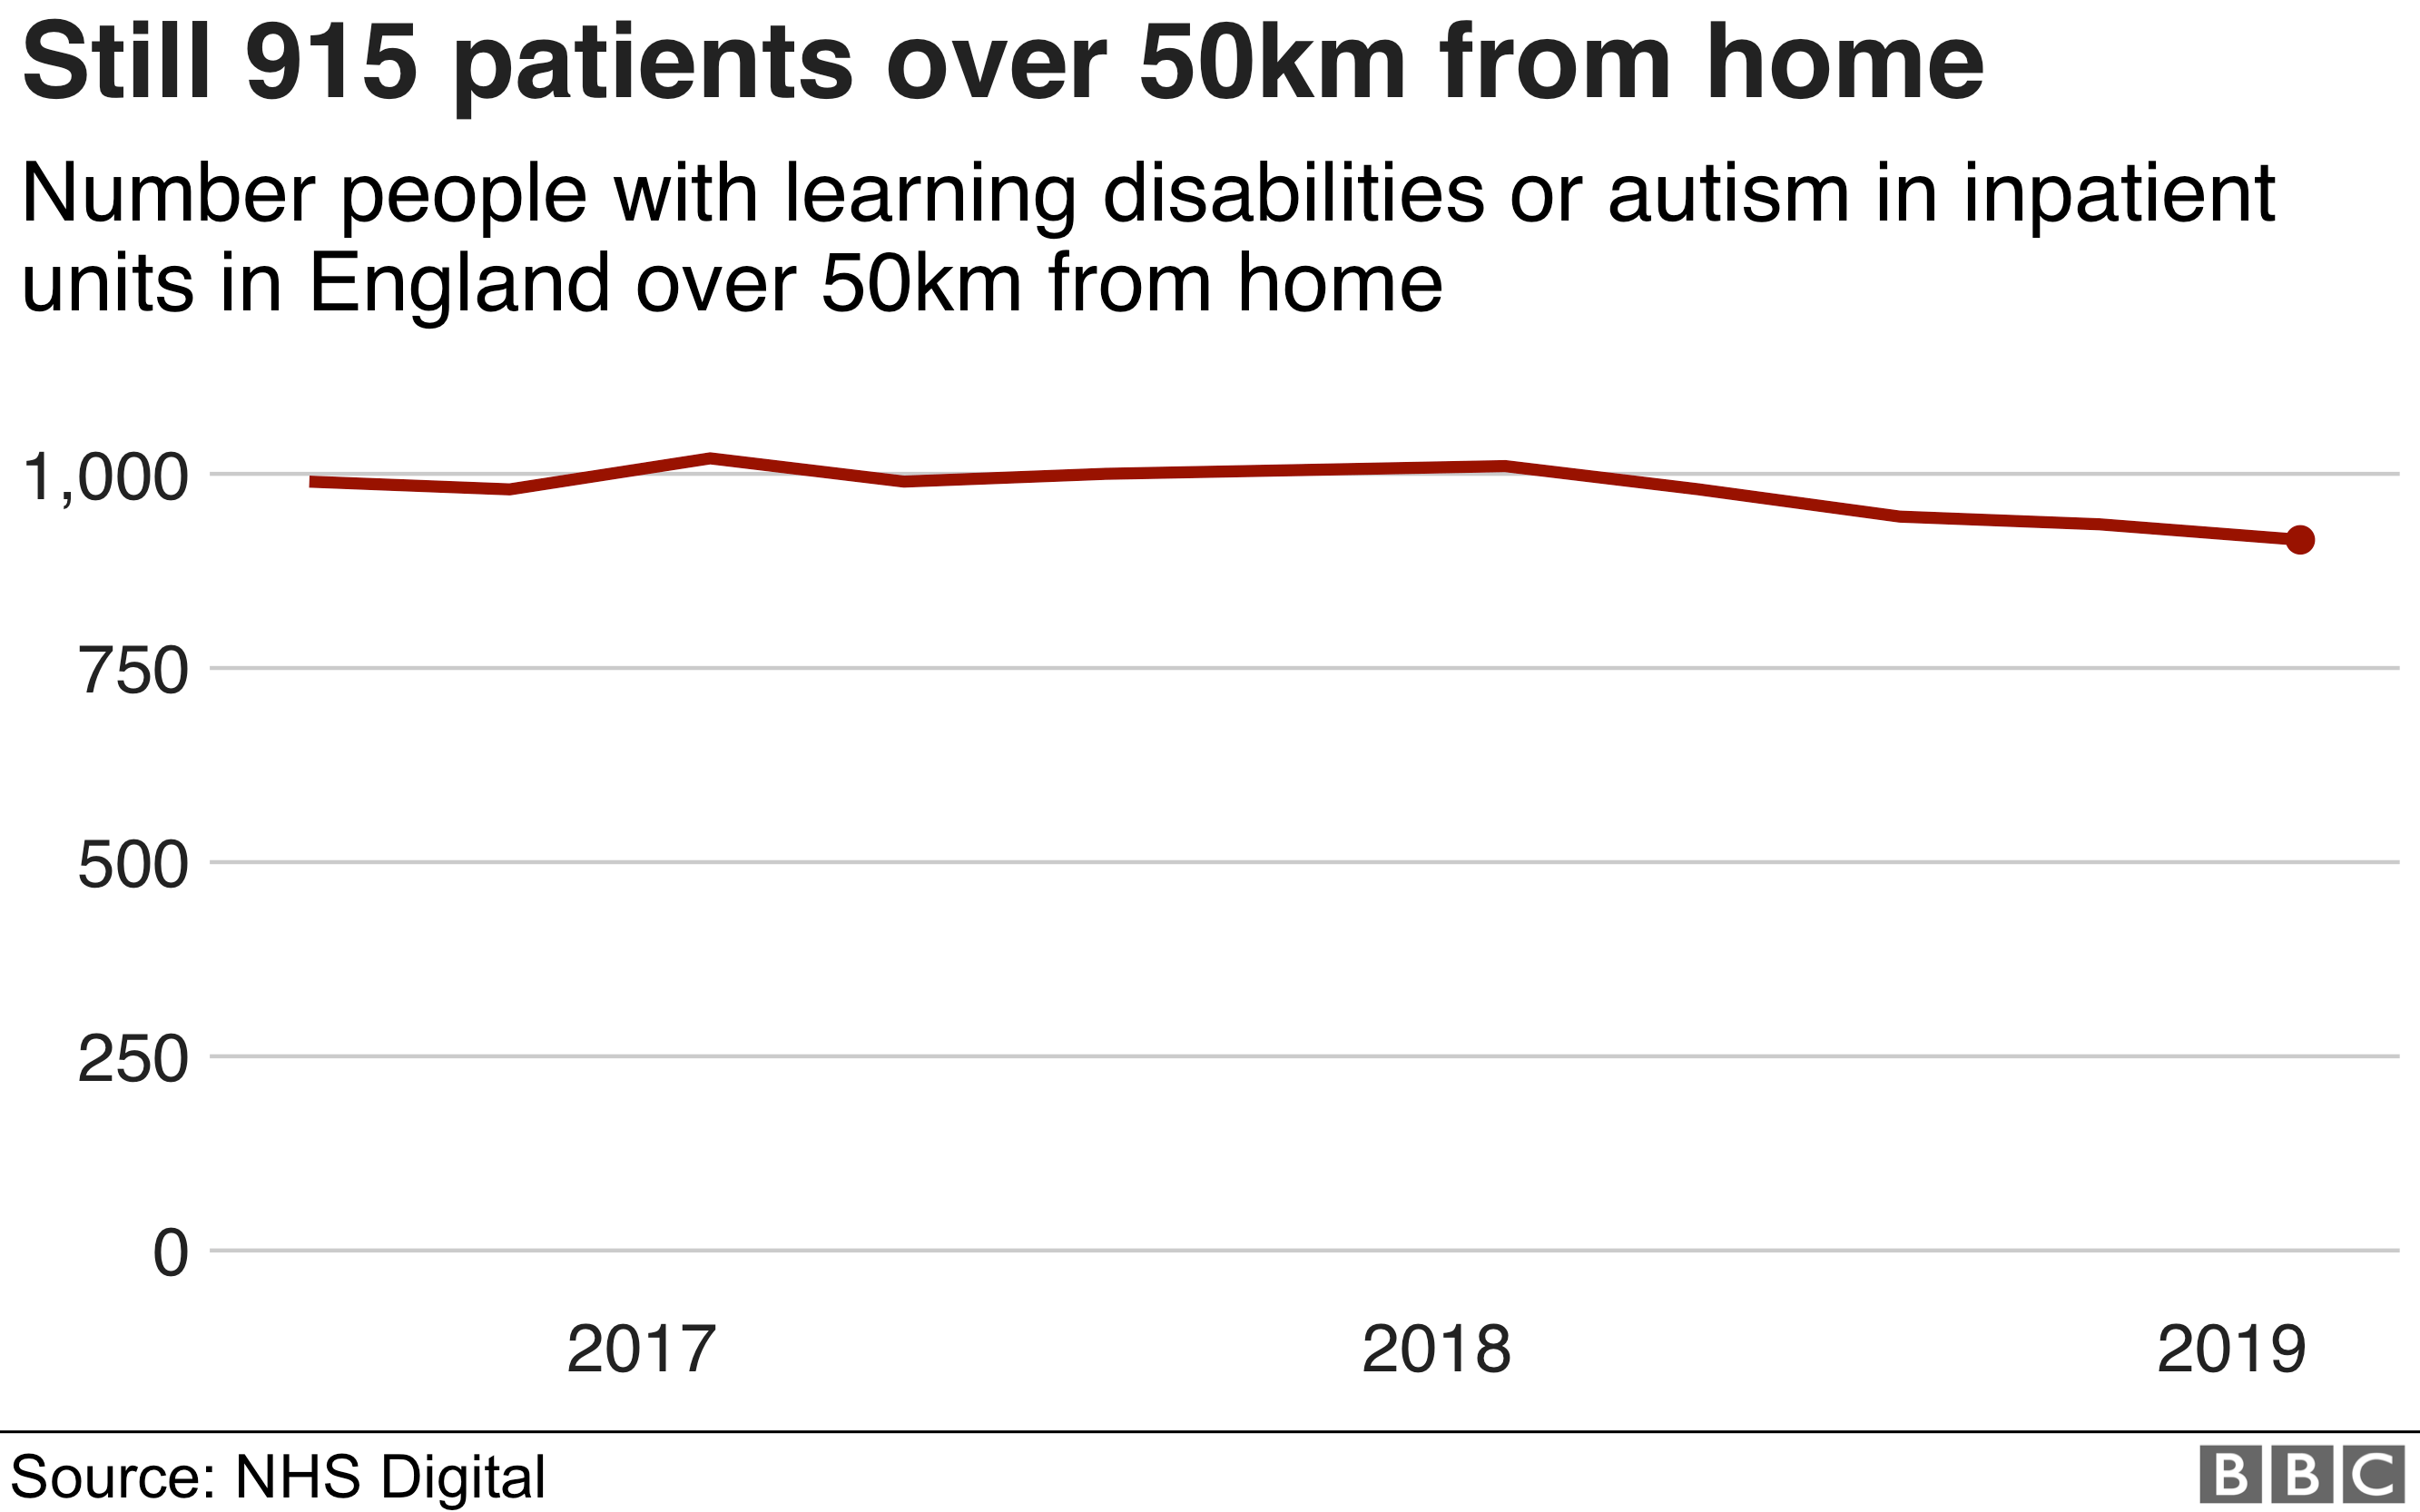 Chart showing ATU inpatients' average distance from home